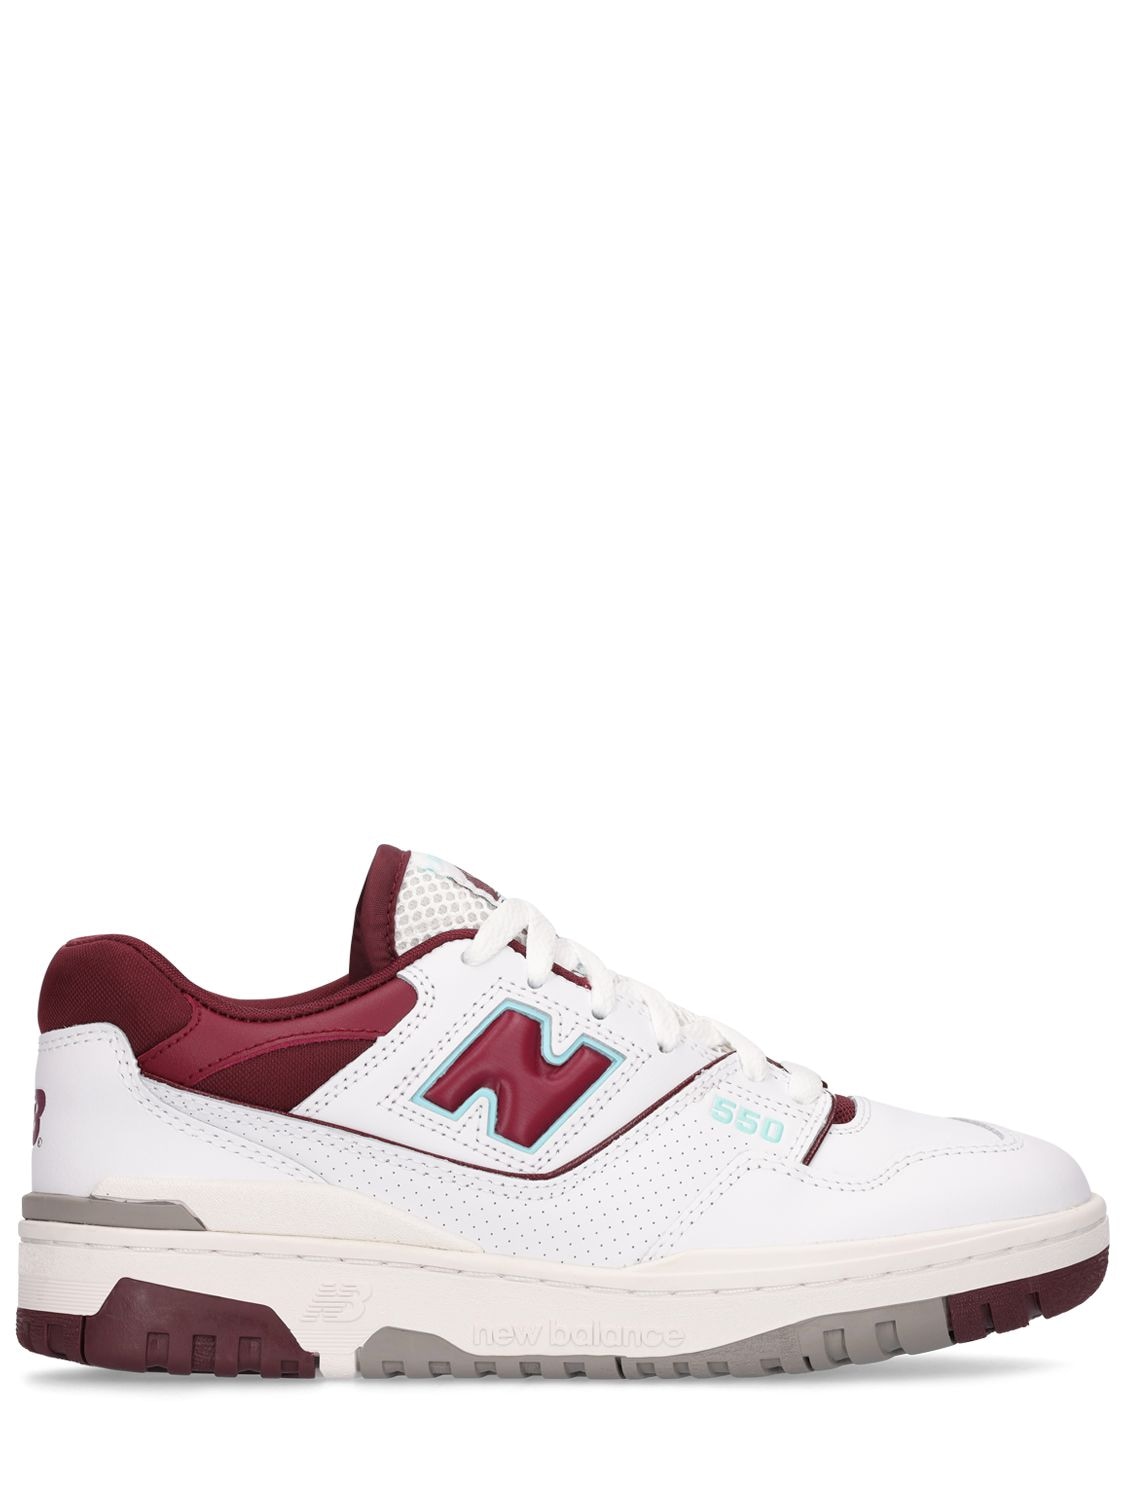 NEW BALANCE 550 SNEAKERS